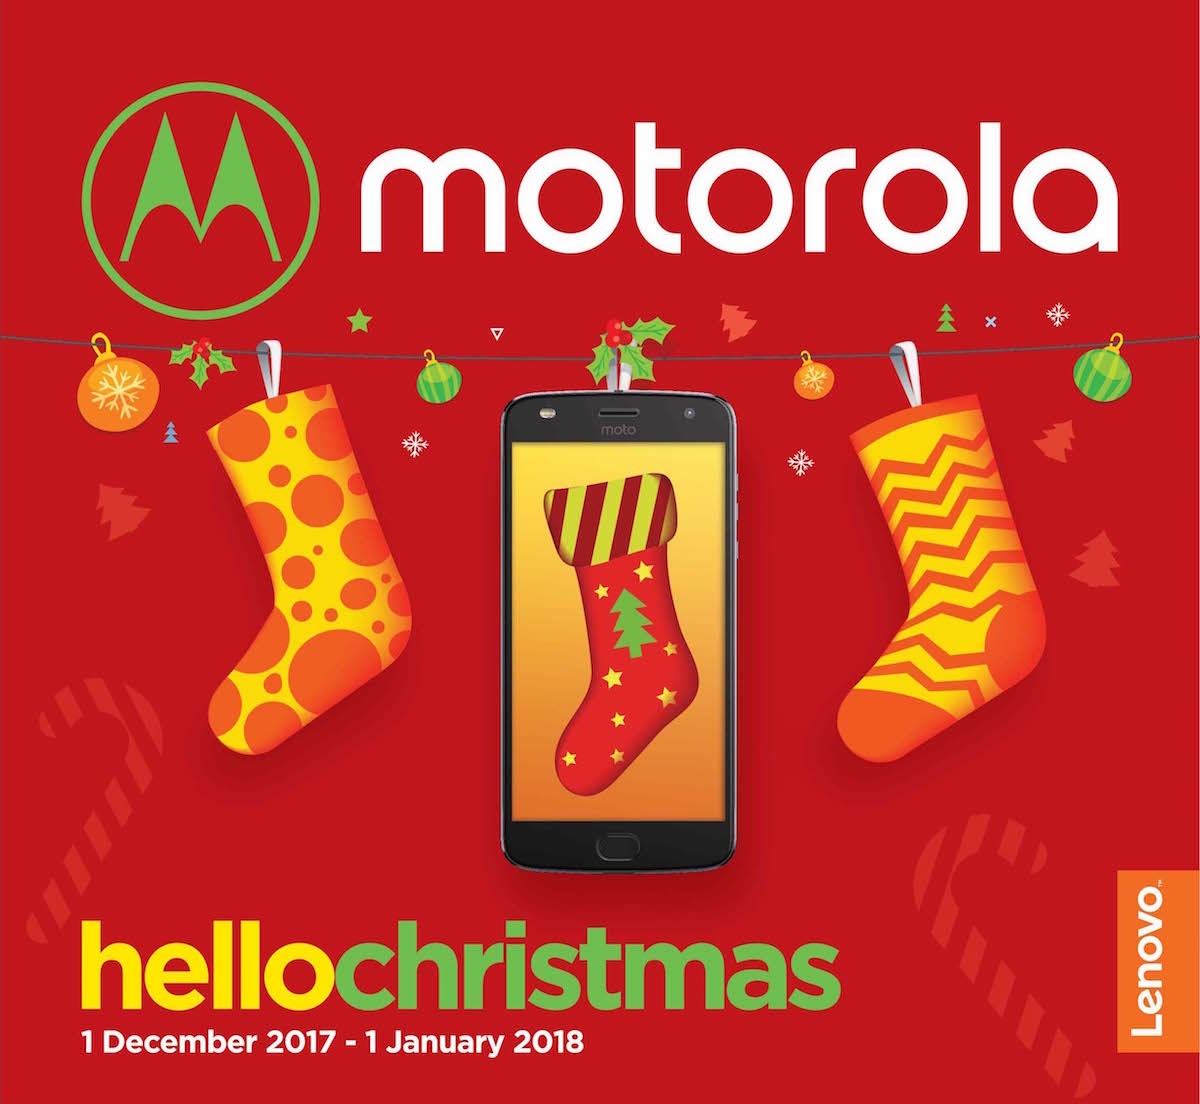 Hello Christmas! Stand a chance to win over RM80,000 of prizes from Motorola Malaysia